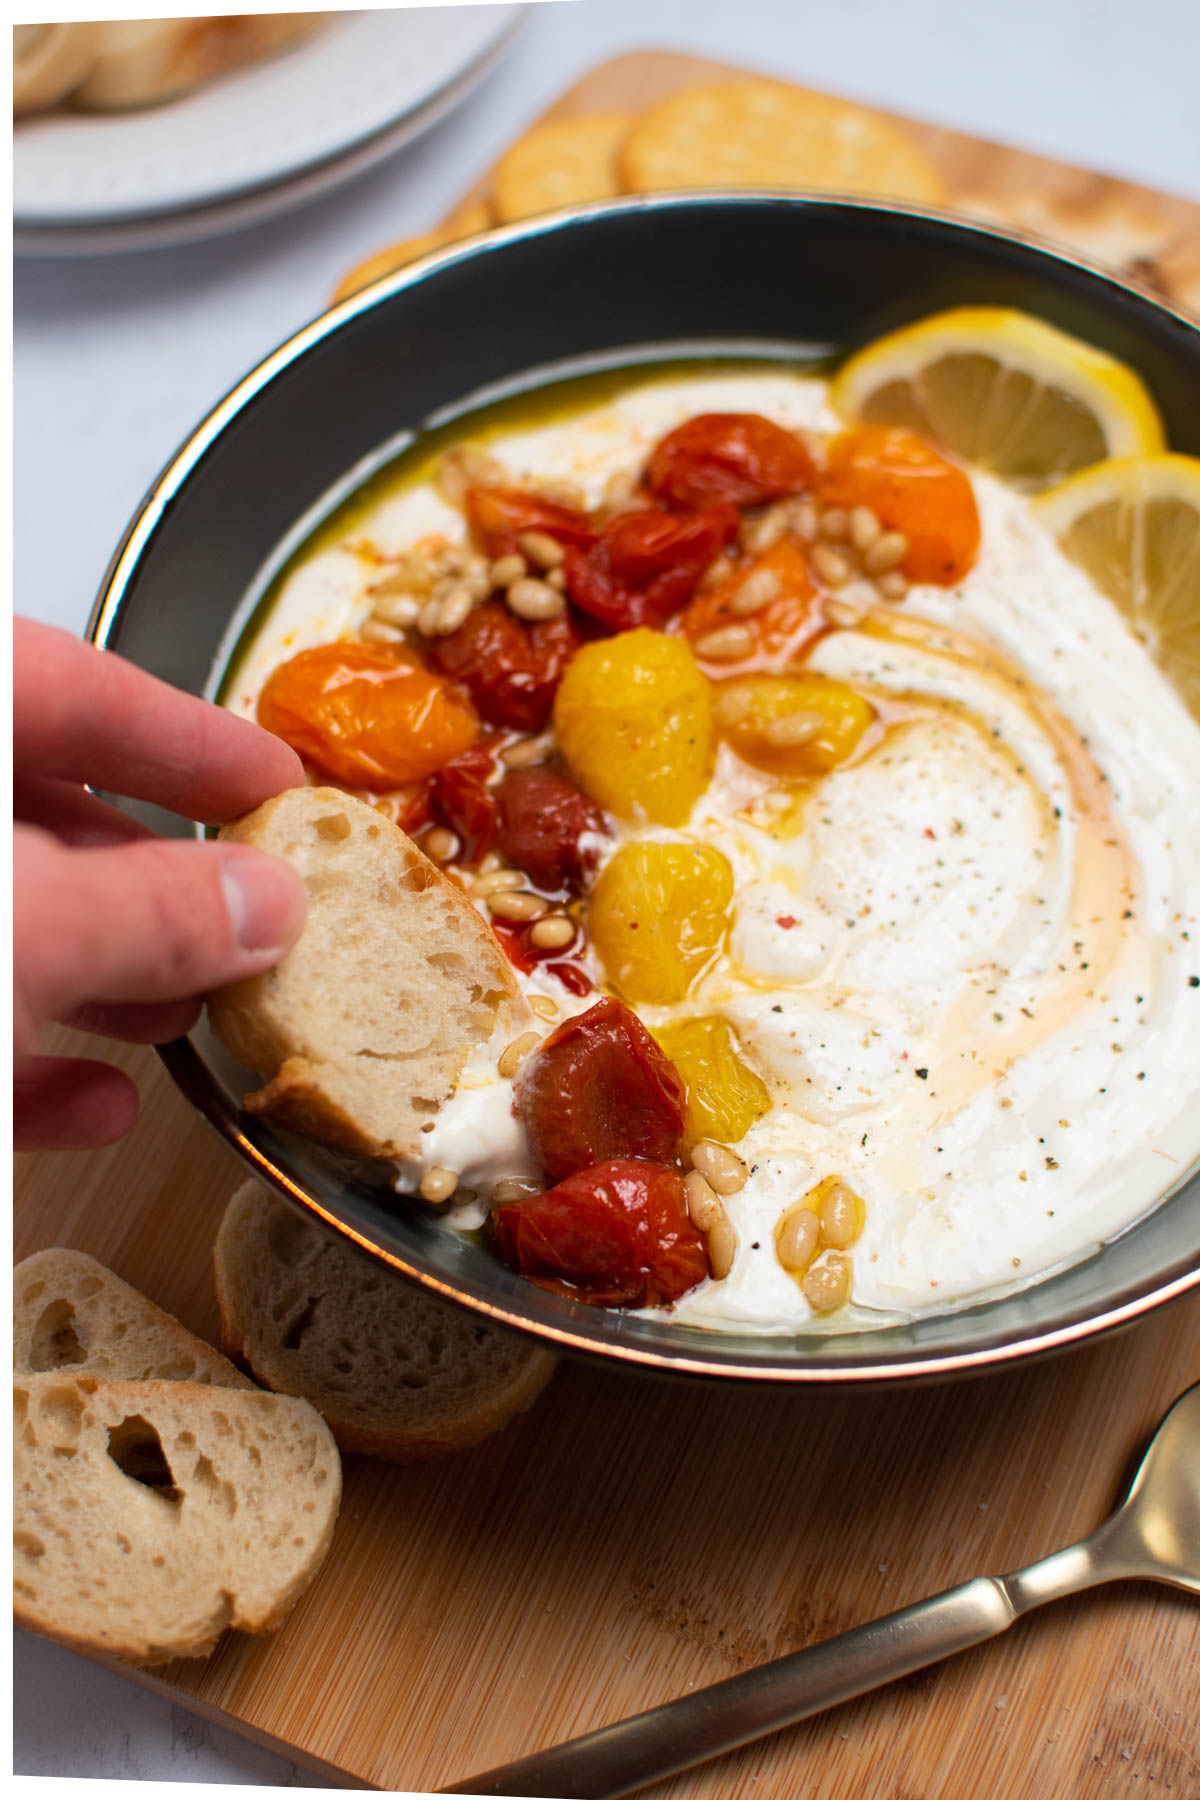 Woman dips slice of baguette in feta cream cheese dip with tomatoes and pine nuts.